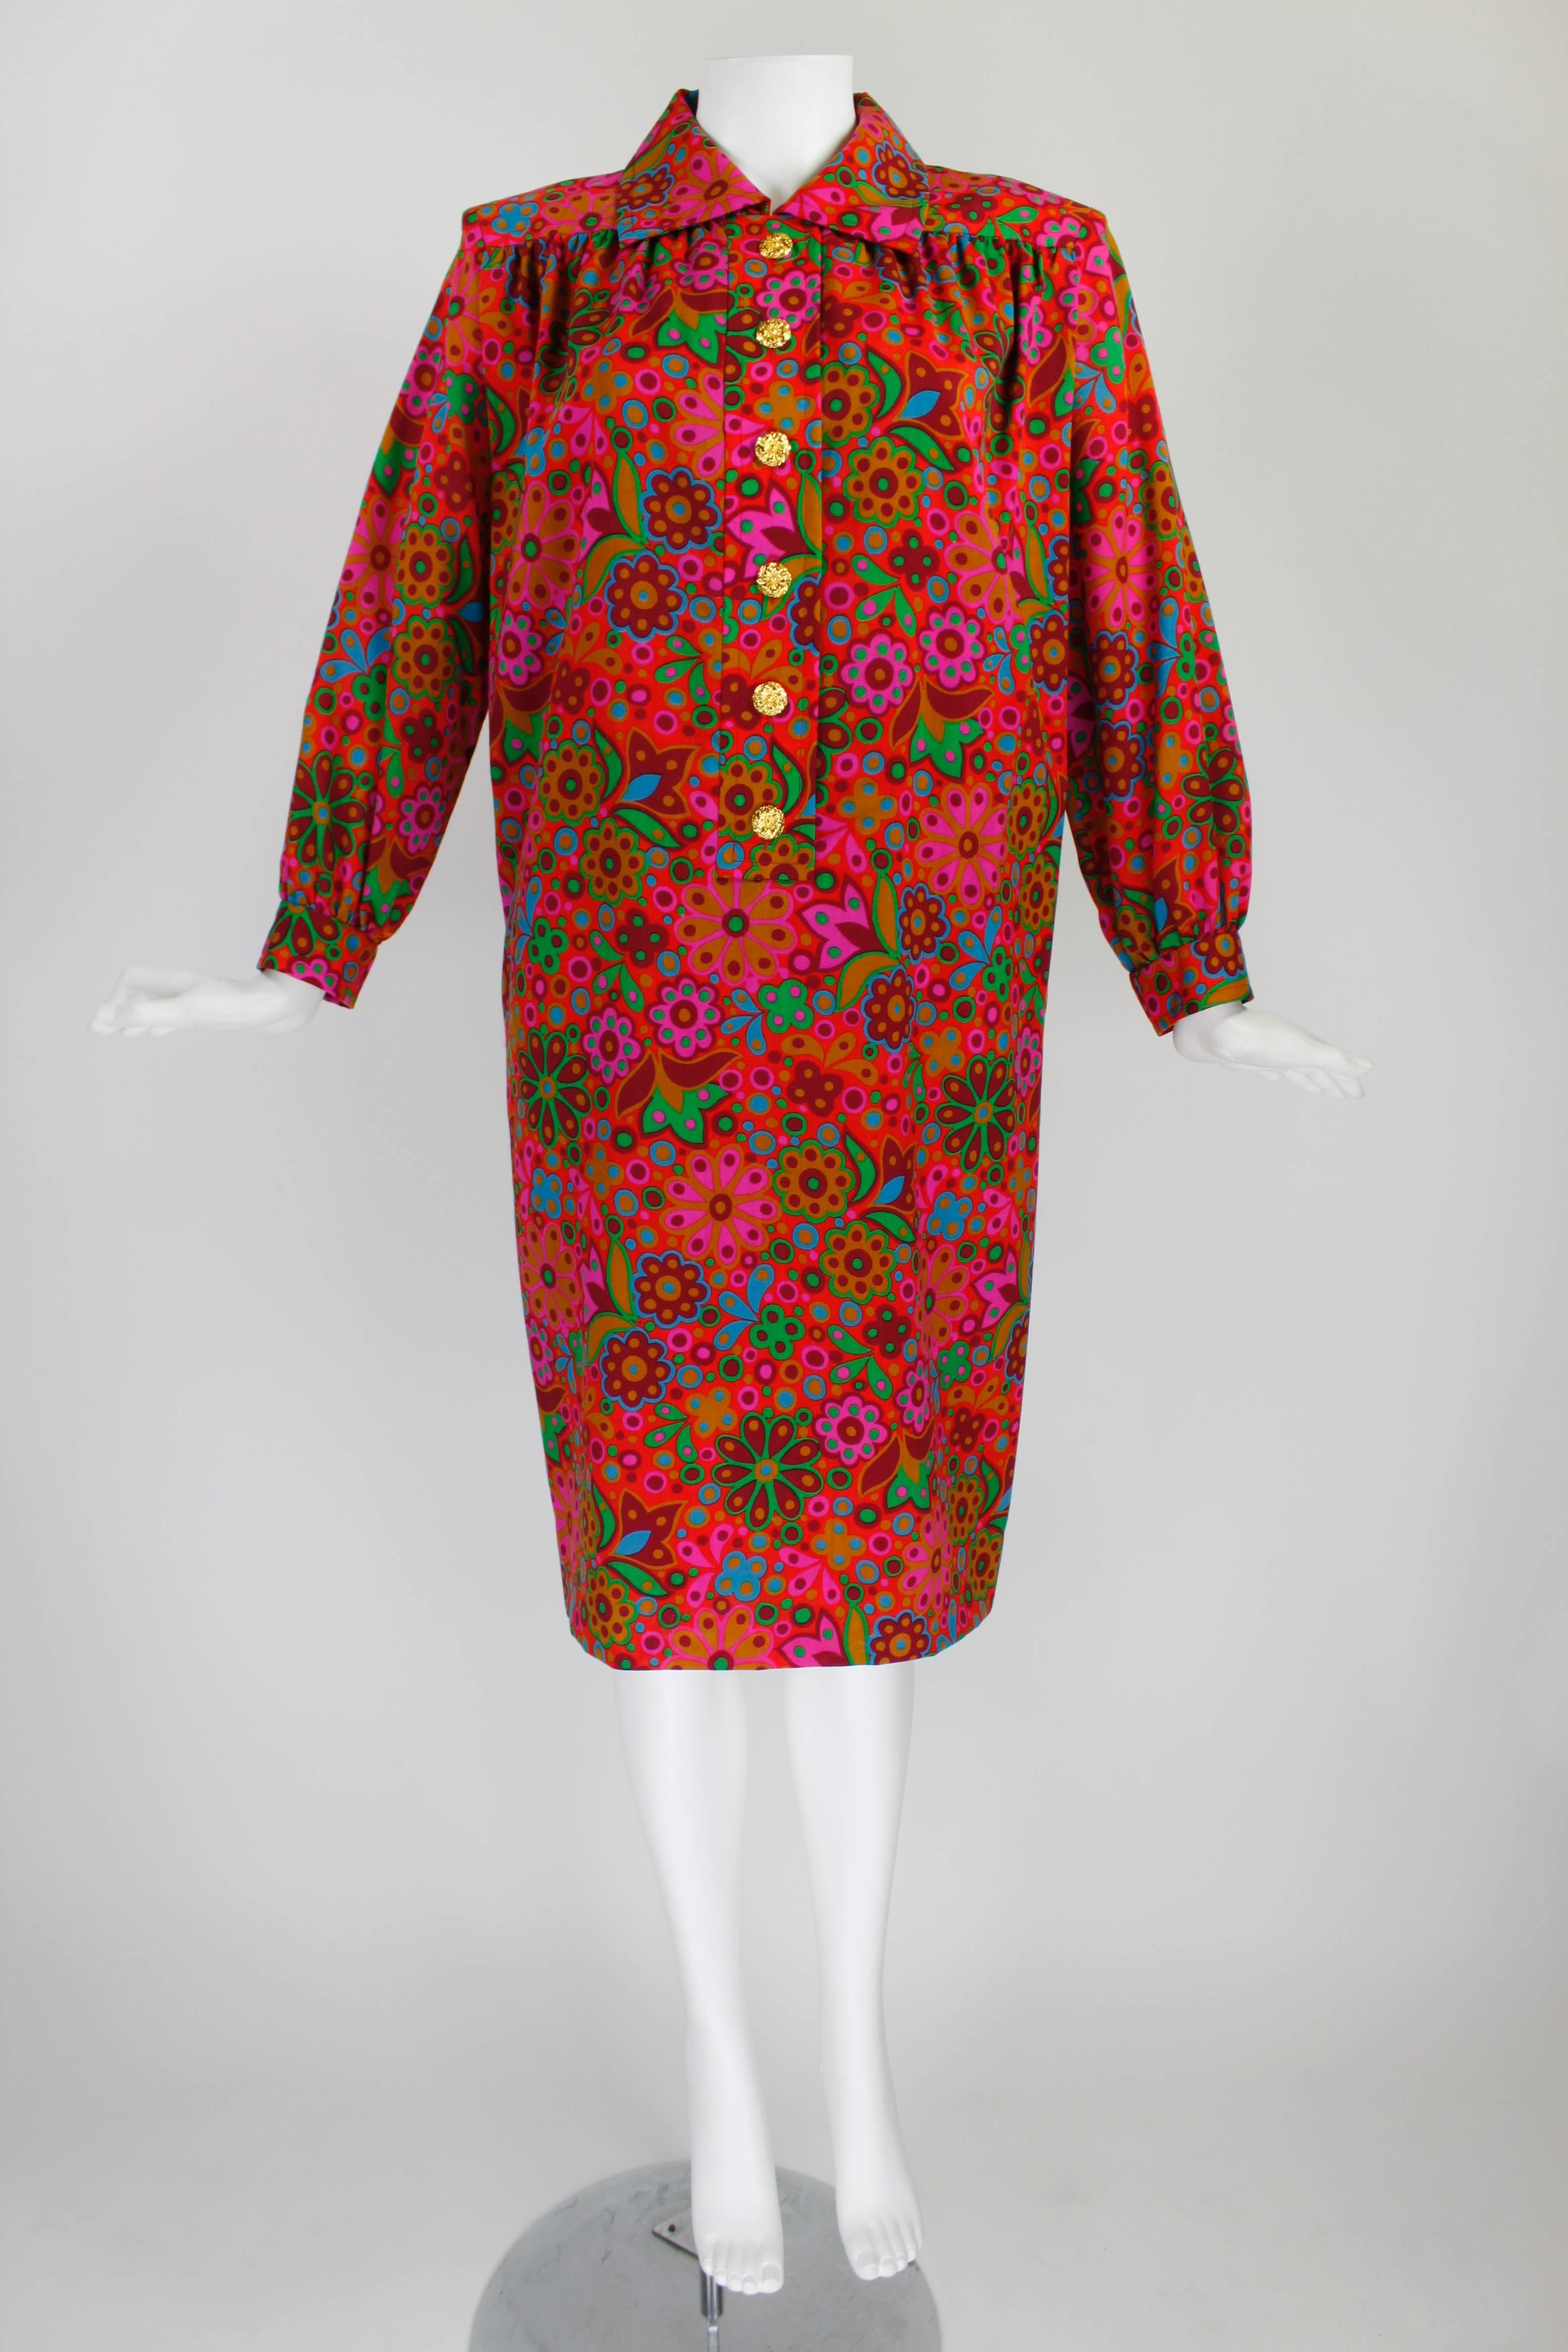 1970s YSL Electric Red Mod Floral Print Dress with Snakeskin Belt 5